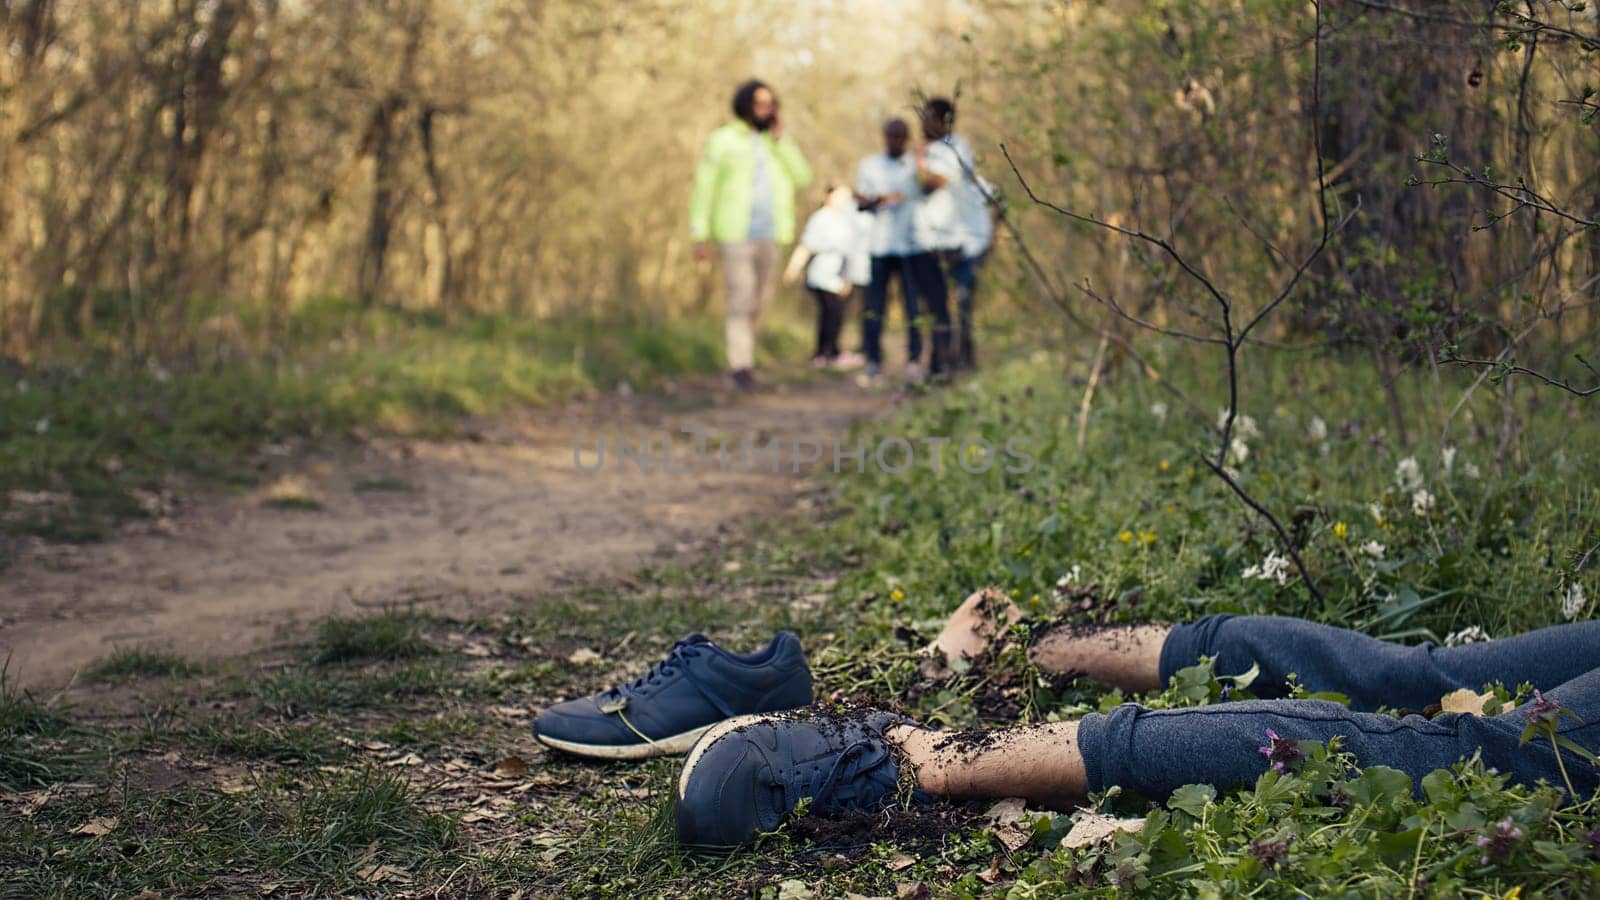 Rescuers group finding murdered barefoot victim in the forest by DCStudio